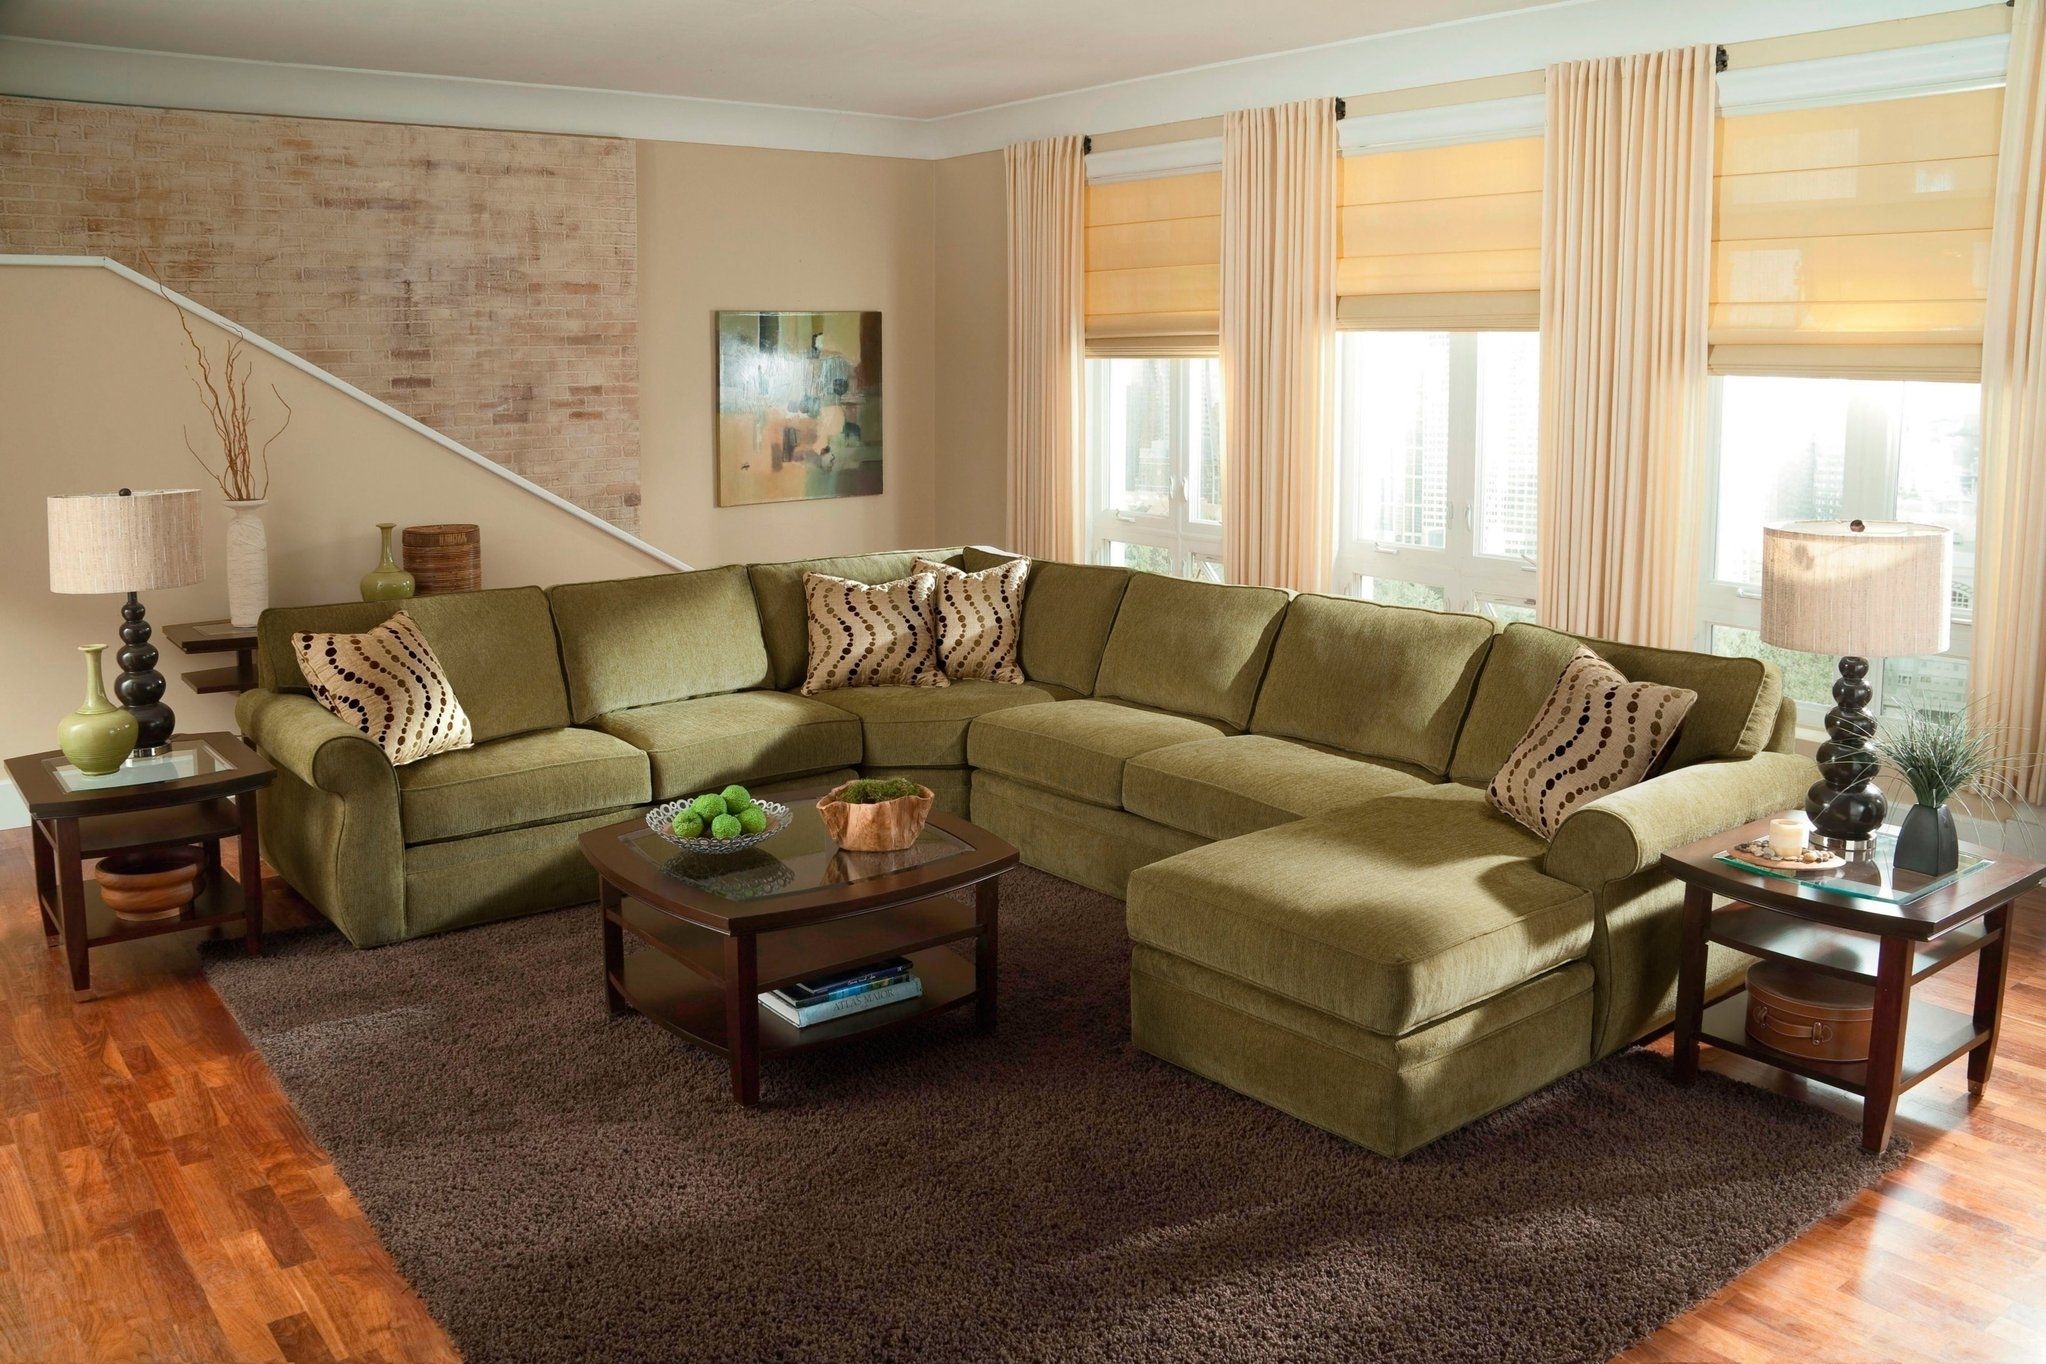 Large Scale U Shaped Sectional Sofa Set | Many Fabric Options 11410 In Big U Shaped Sectionals (View 2 of 15)